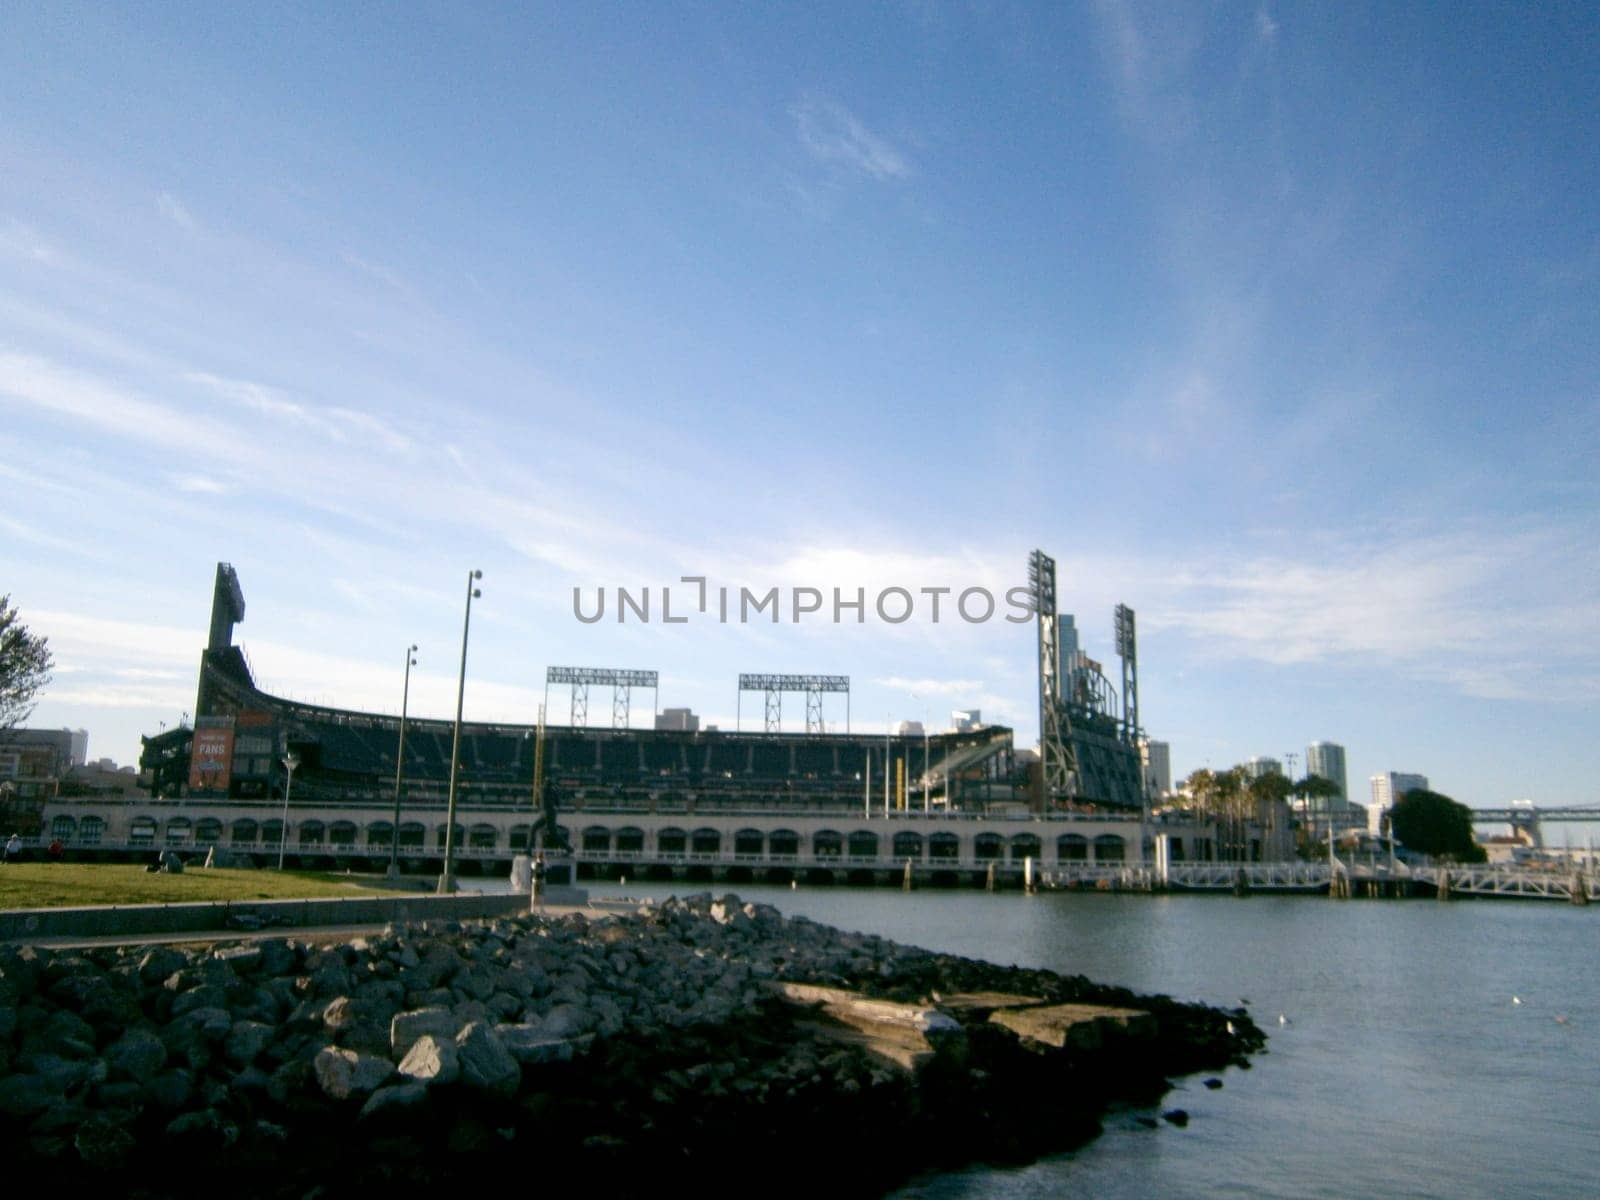 San Francisco - October 9, 2011: Clear view of Oracle Park, home to the San Francisco Giants, from across McCovey Cove. The photo shows the calm waters of the cove reflecting the sky, and the rocky shoreline at the bottom. The photo also shows the distinctive architecture and stadium lights of Oracle Park. 